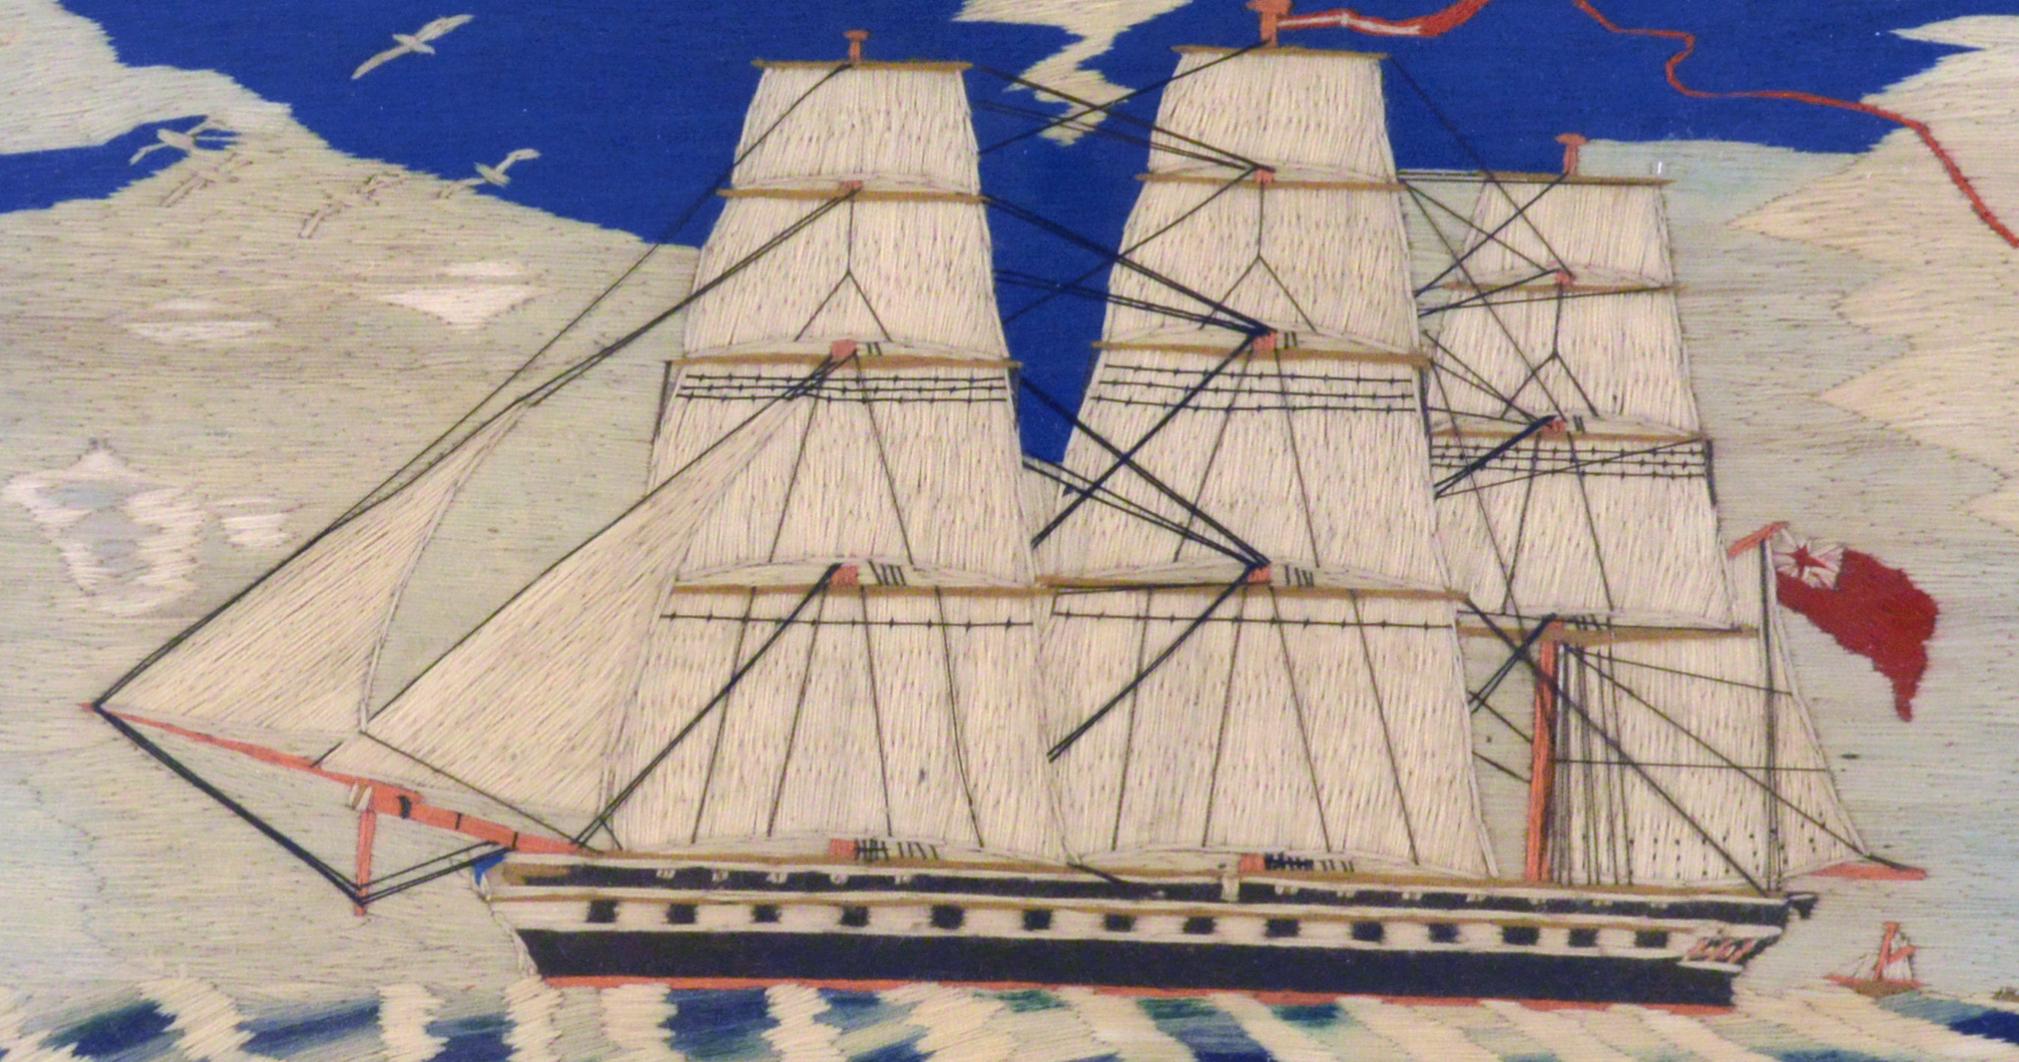 Sailor's Woolwork of a Royal Navy Frigate,
circa 1870-1880.
(VM98341/IMRR)

A sailor’s woolie picture of a portside view of a three-masted Royal Navy frigate under full sail flying a red ensign. In the far distance, beyond the stern, can be seen